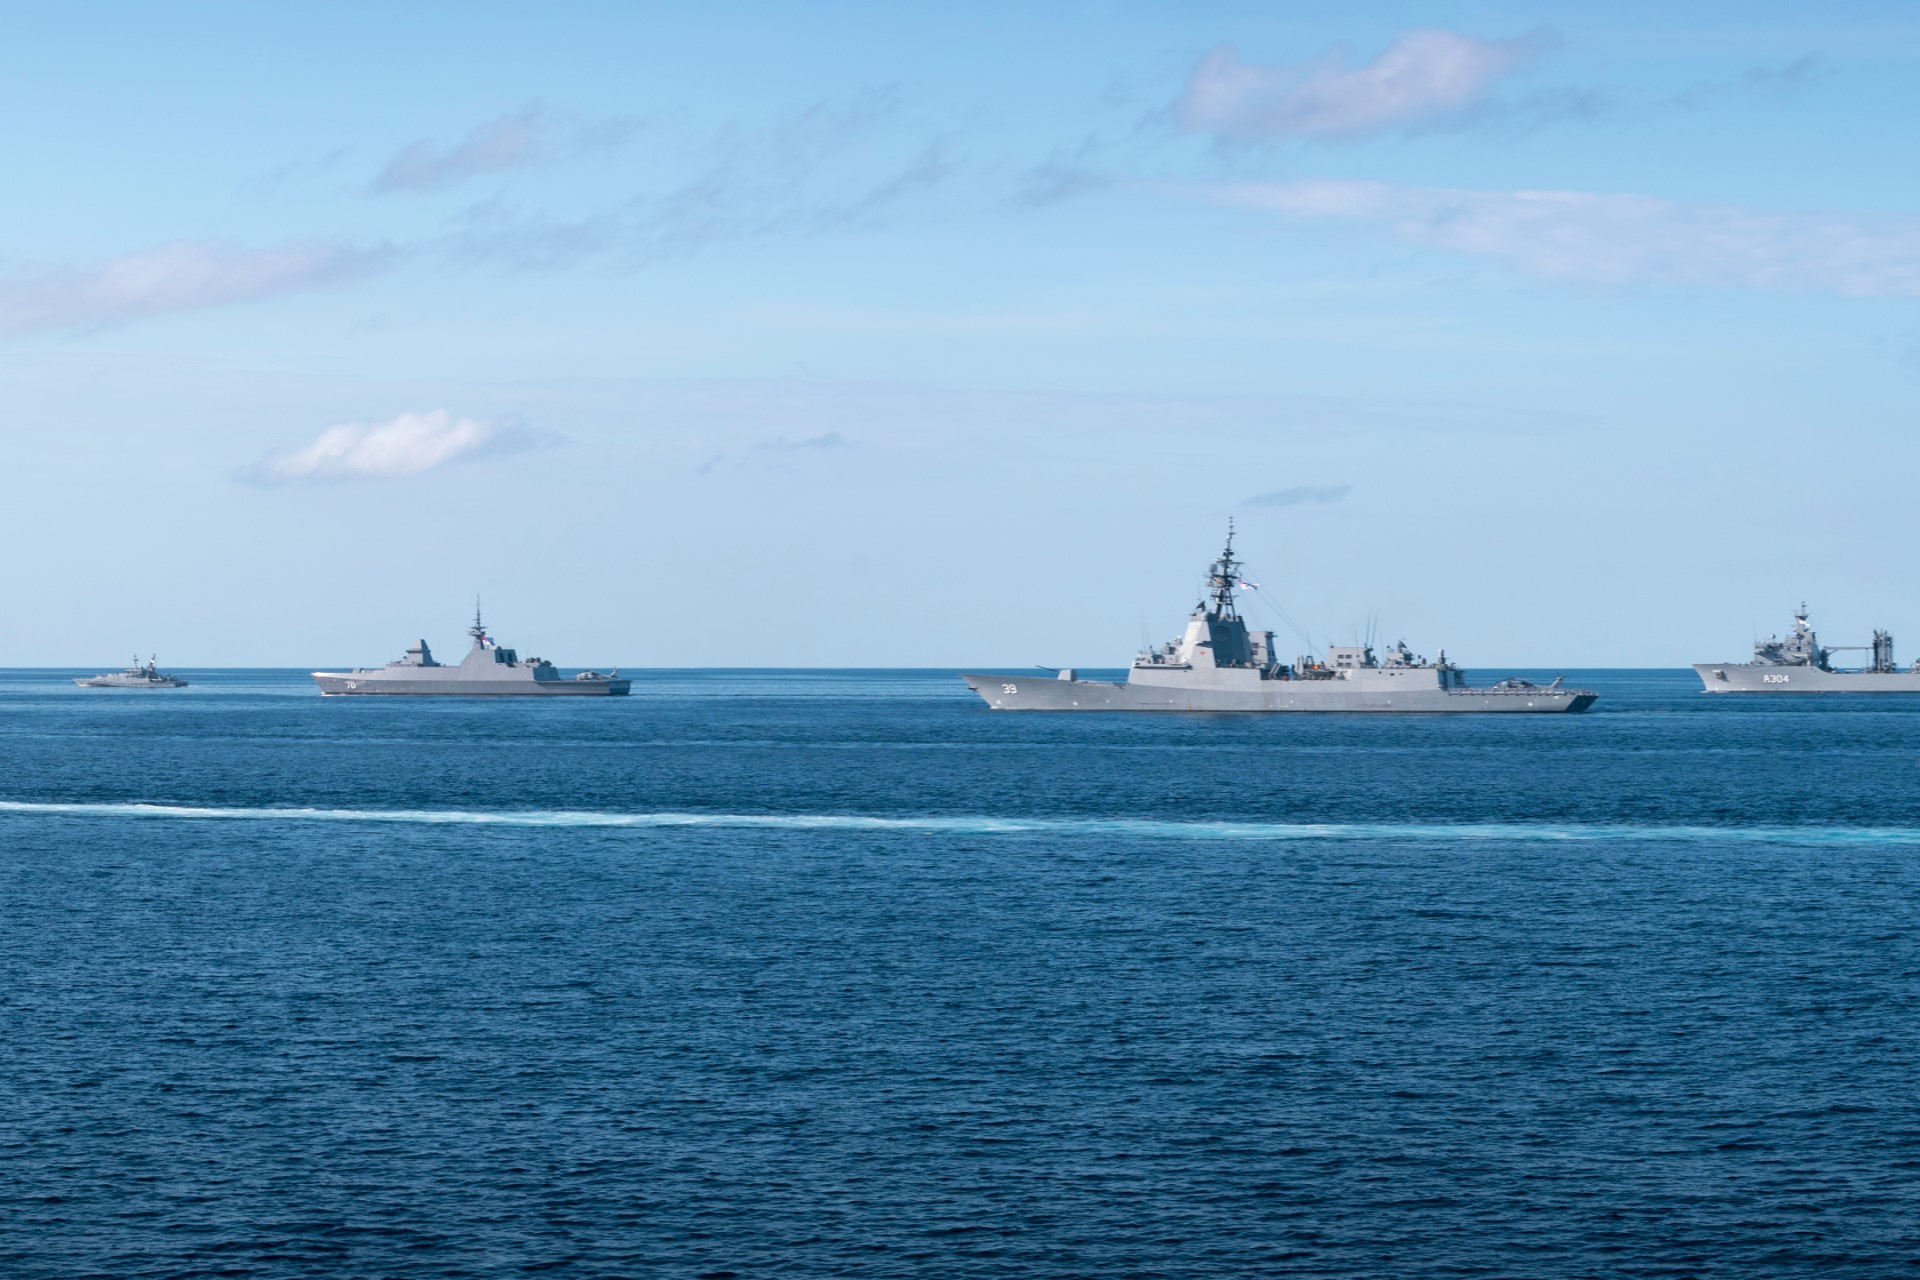 Participating navies, including the Republic of Singapore Navy (RSN), sailing in formation during Exercise Kakadu.